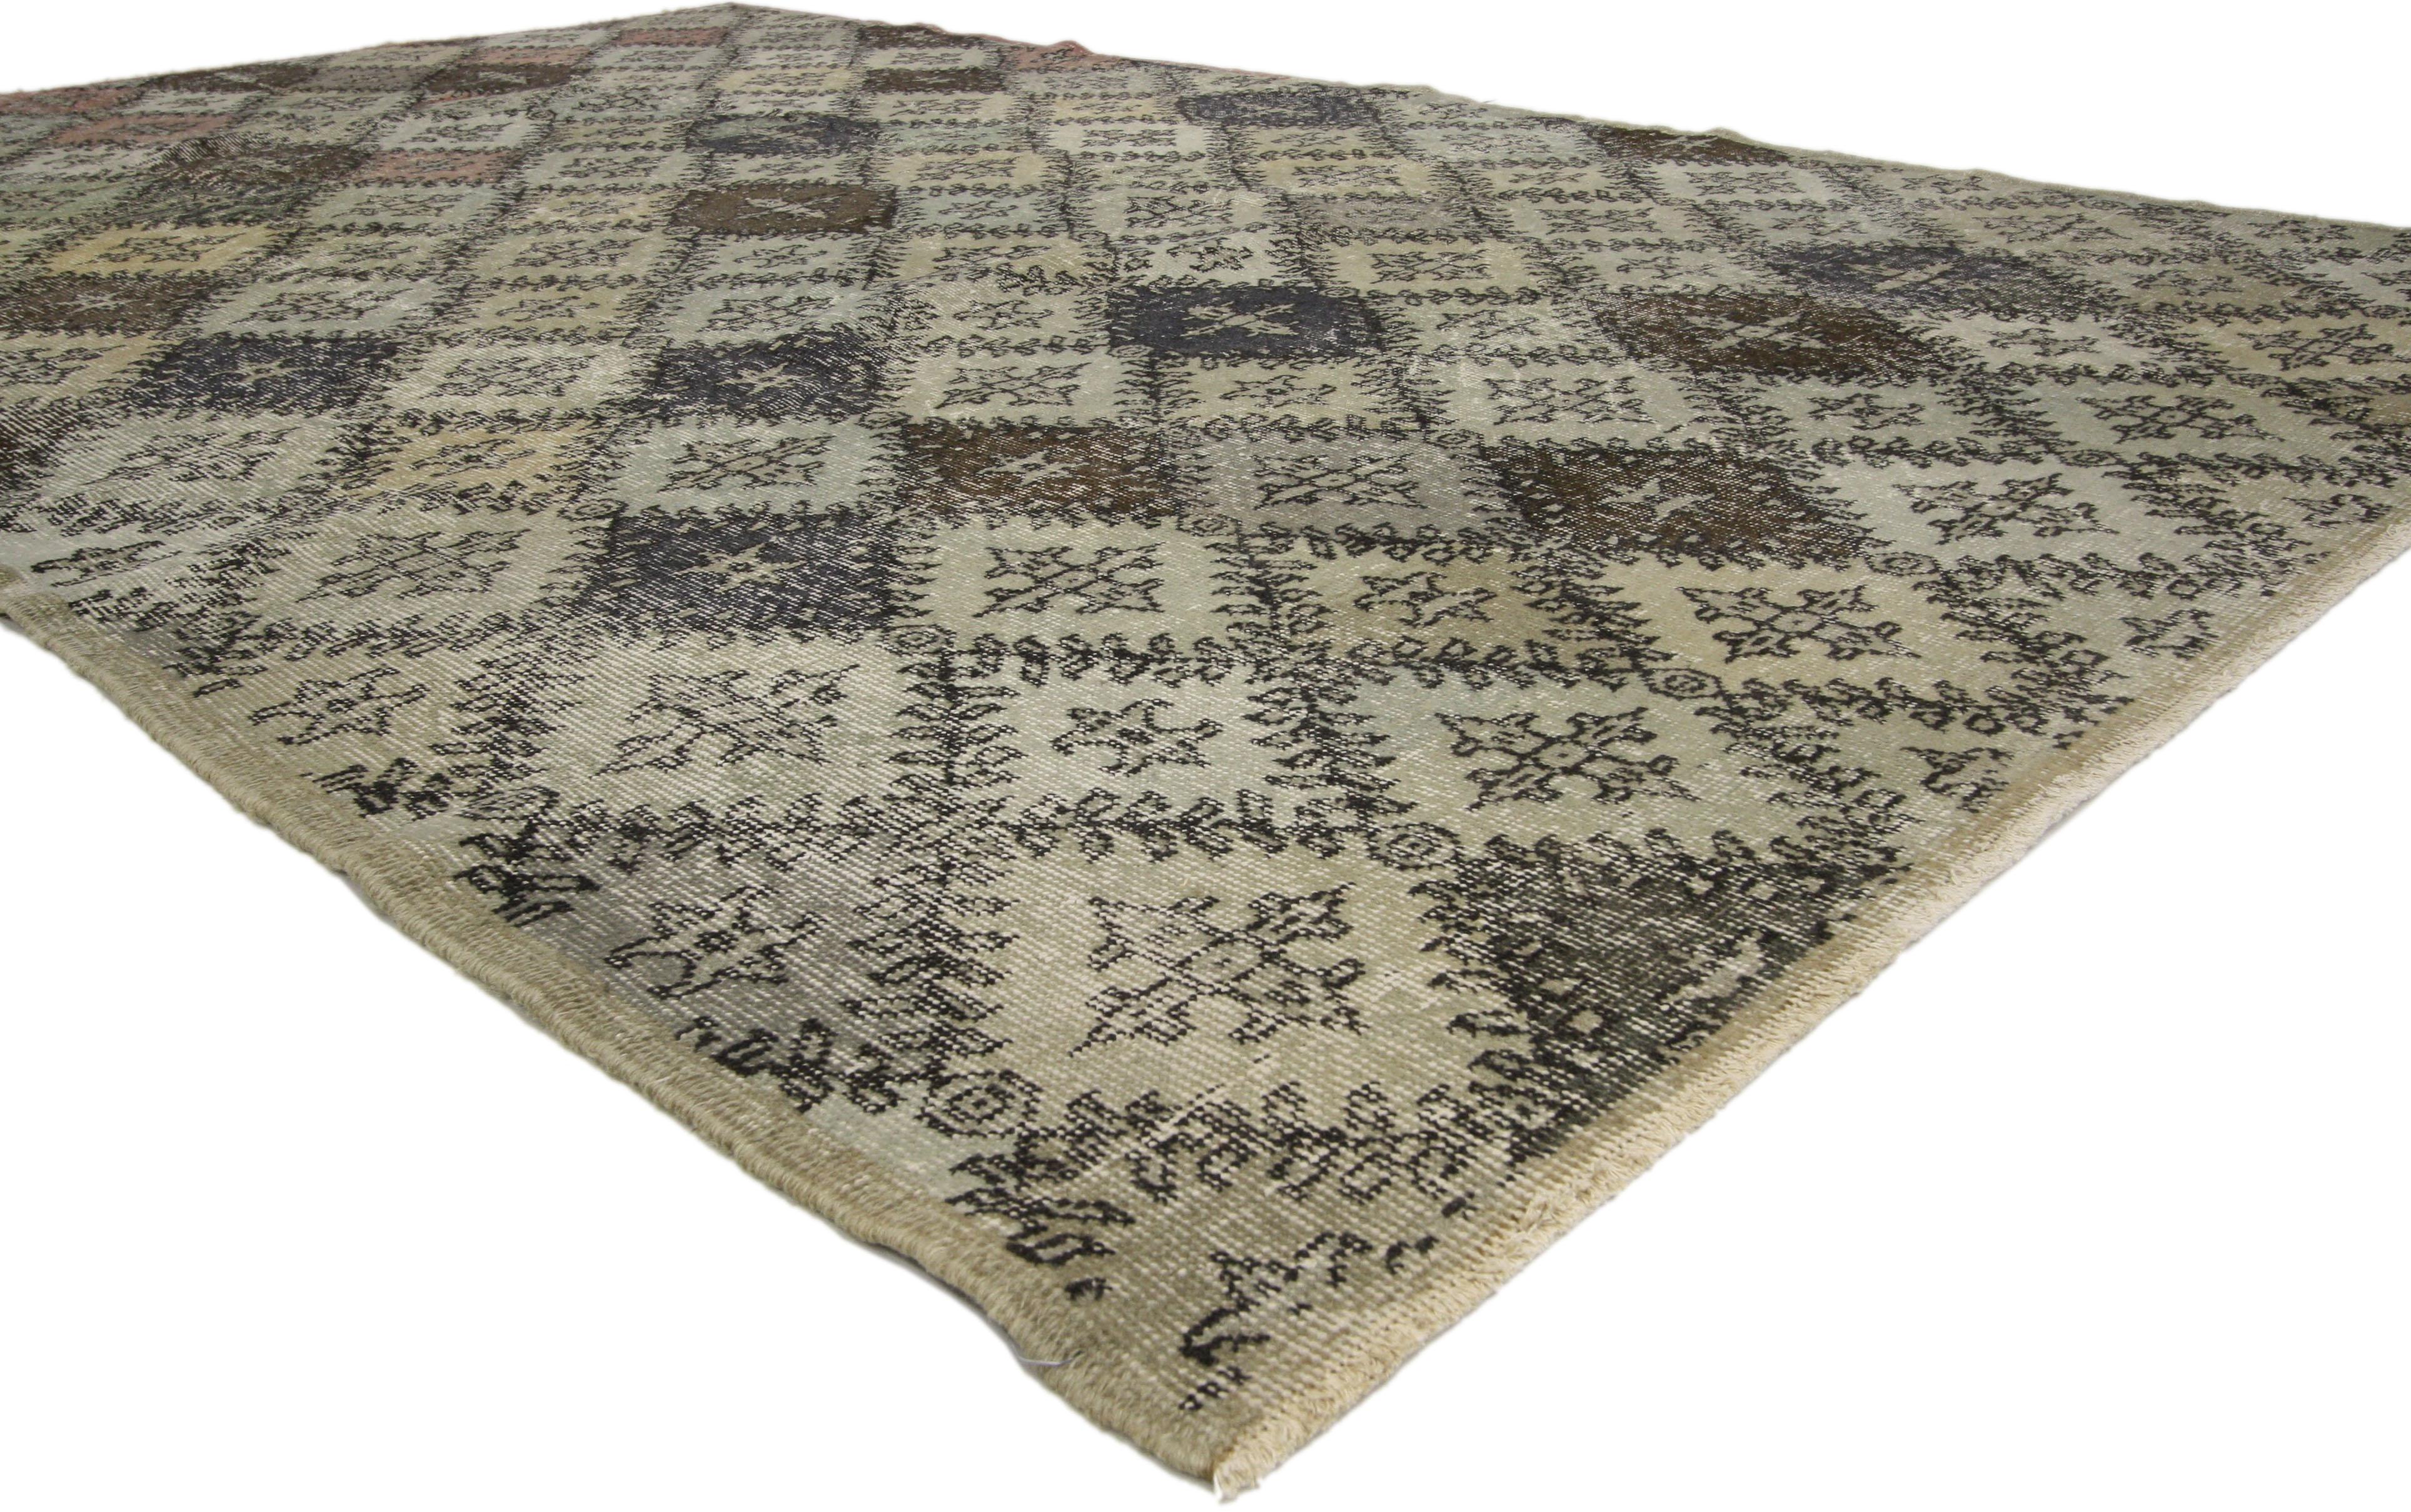 50872 Zeki Muren Distressed Vintage Turkish Sivas Rug with Industrial Art Deco Style 06'02 x 09'10. Warm and inviting combined with a bold pattern, this hand knotted wool distressed vintage Turkish Sivas rug embodies Art Deco style with a modern